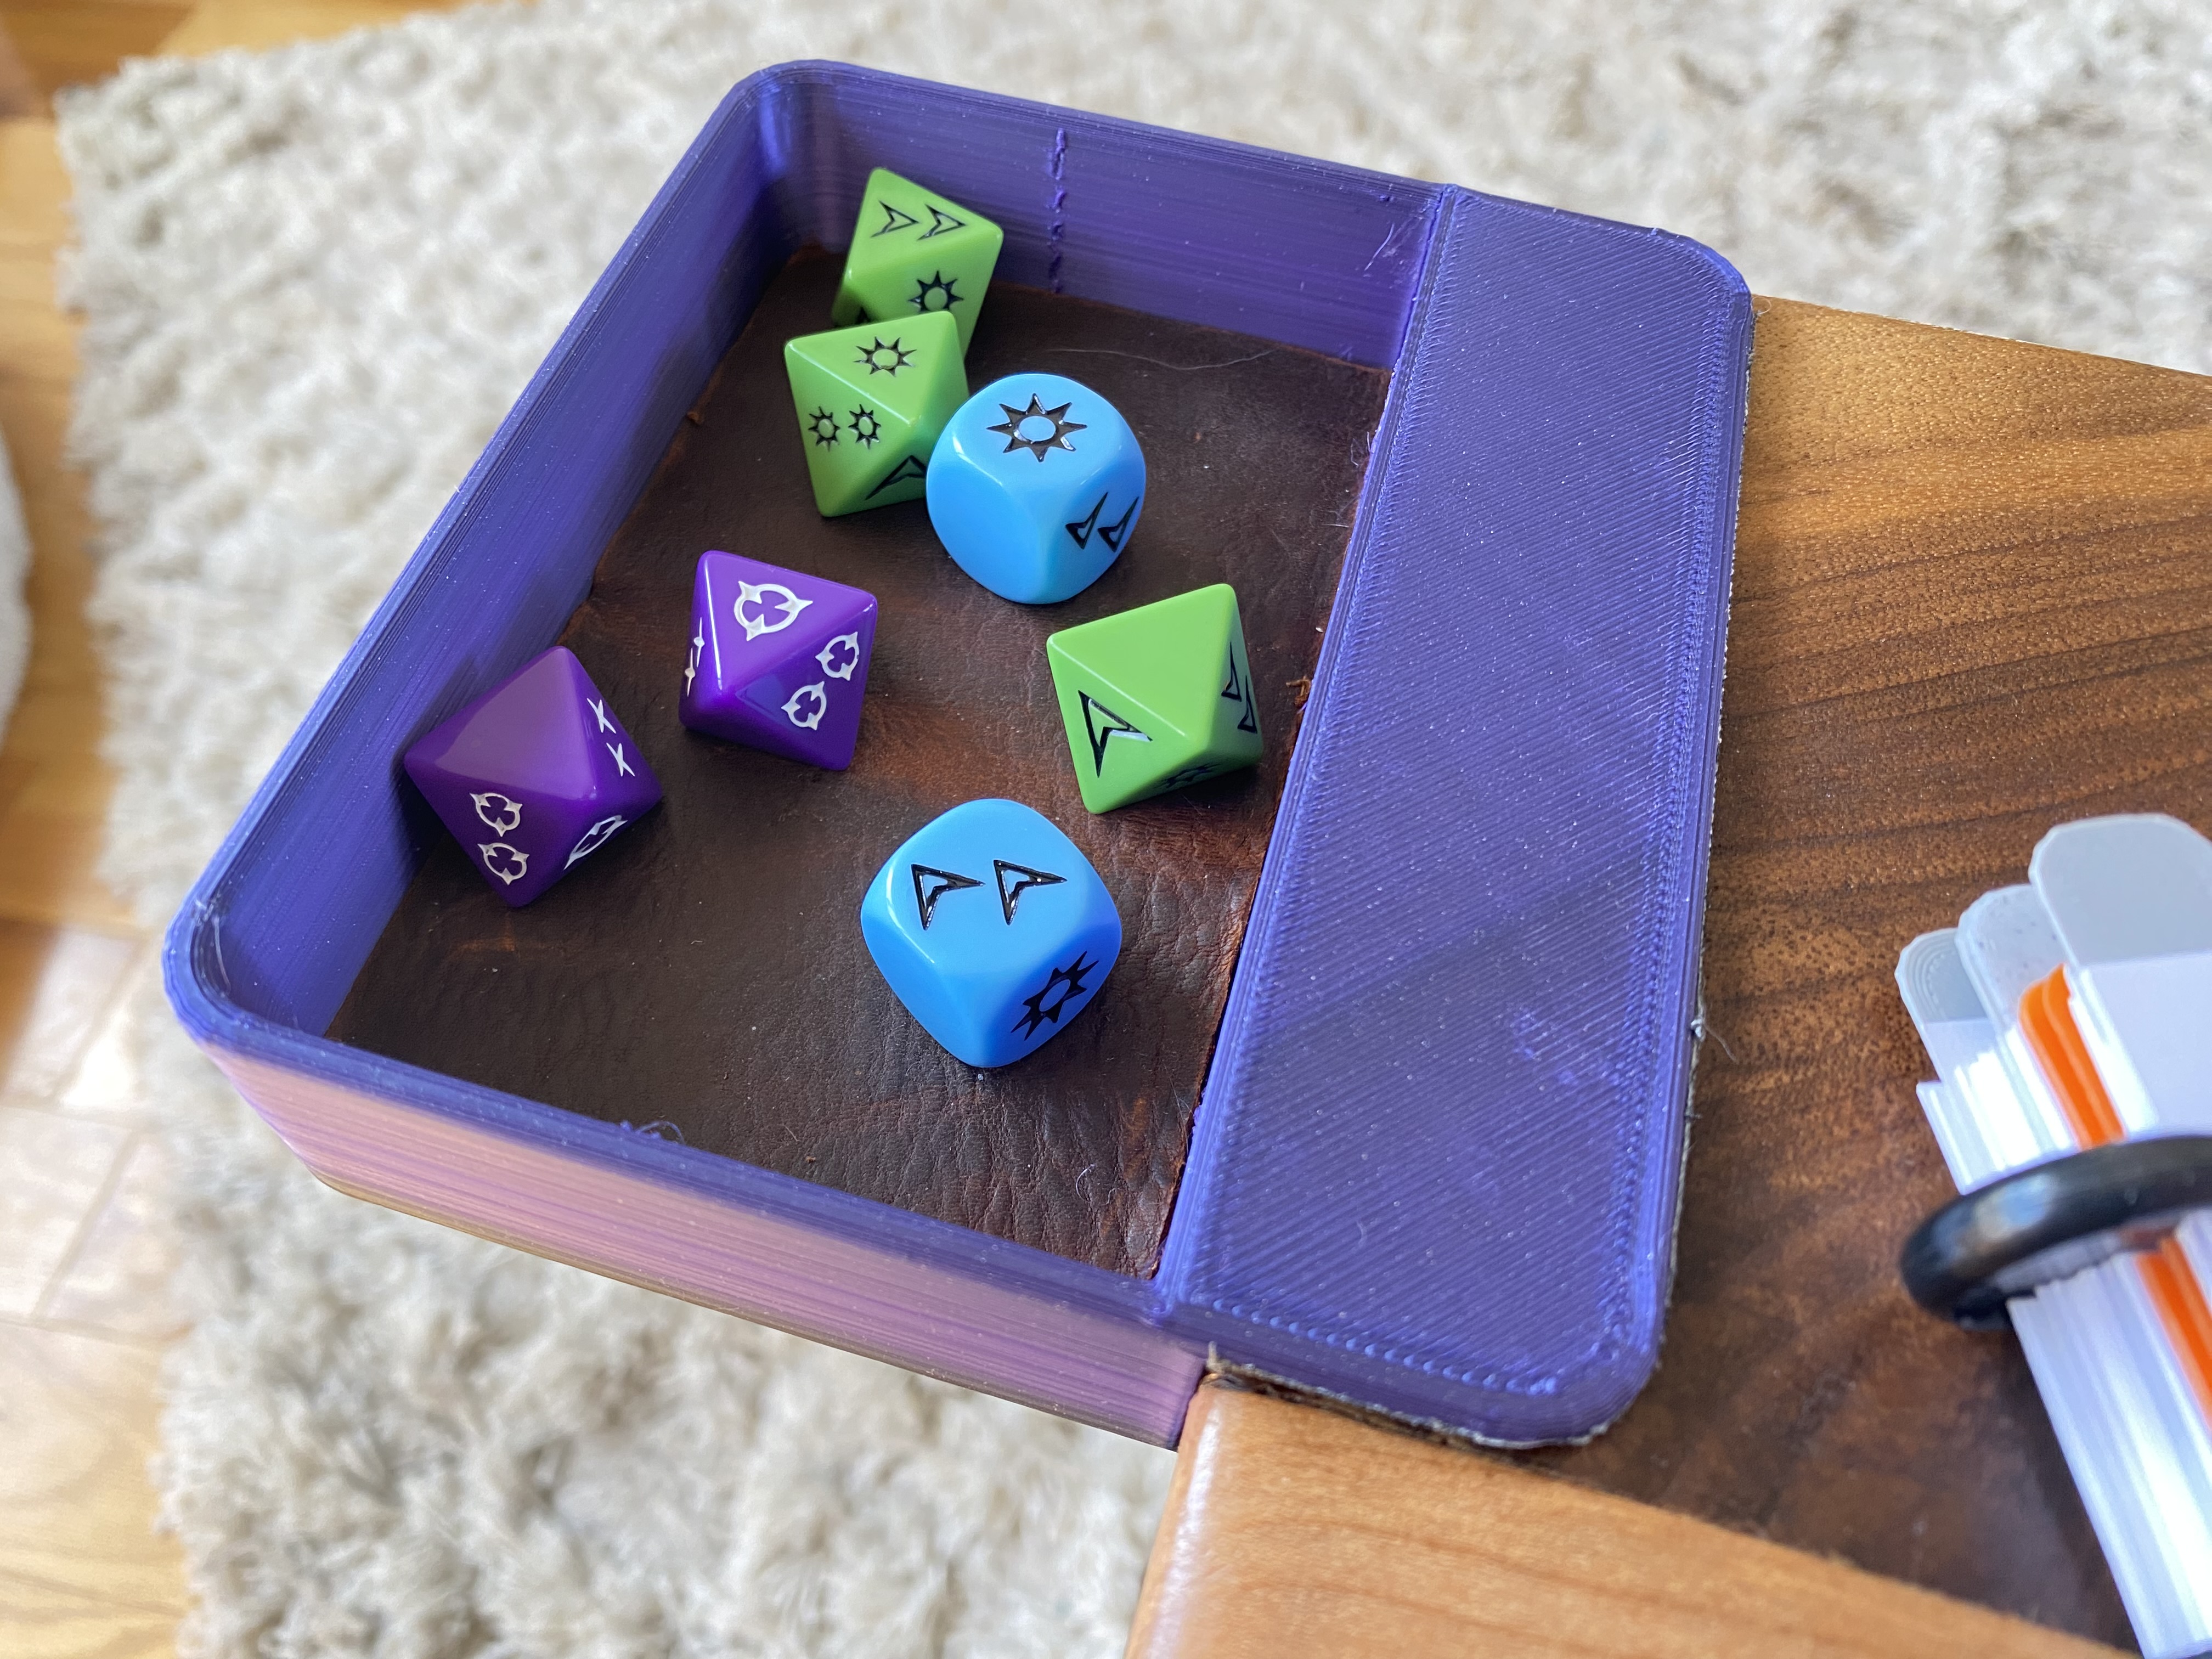 a close-up photo of a 3d printed dice tray holding on to a piece of wood with a notebook on it. in the tray are 7 Genesys dice. The result of the rolled dice is 2 successes and 3 advantages. There is a pieces of brown leather in the bottom of the tray.